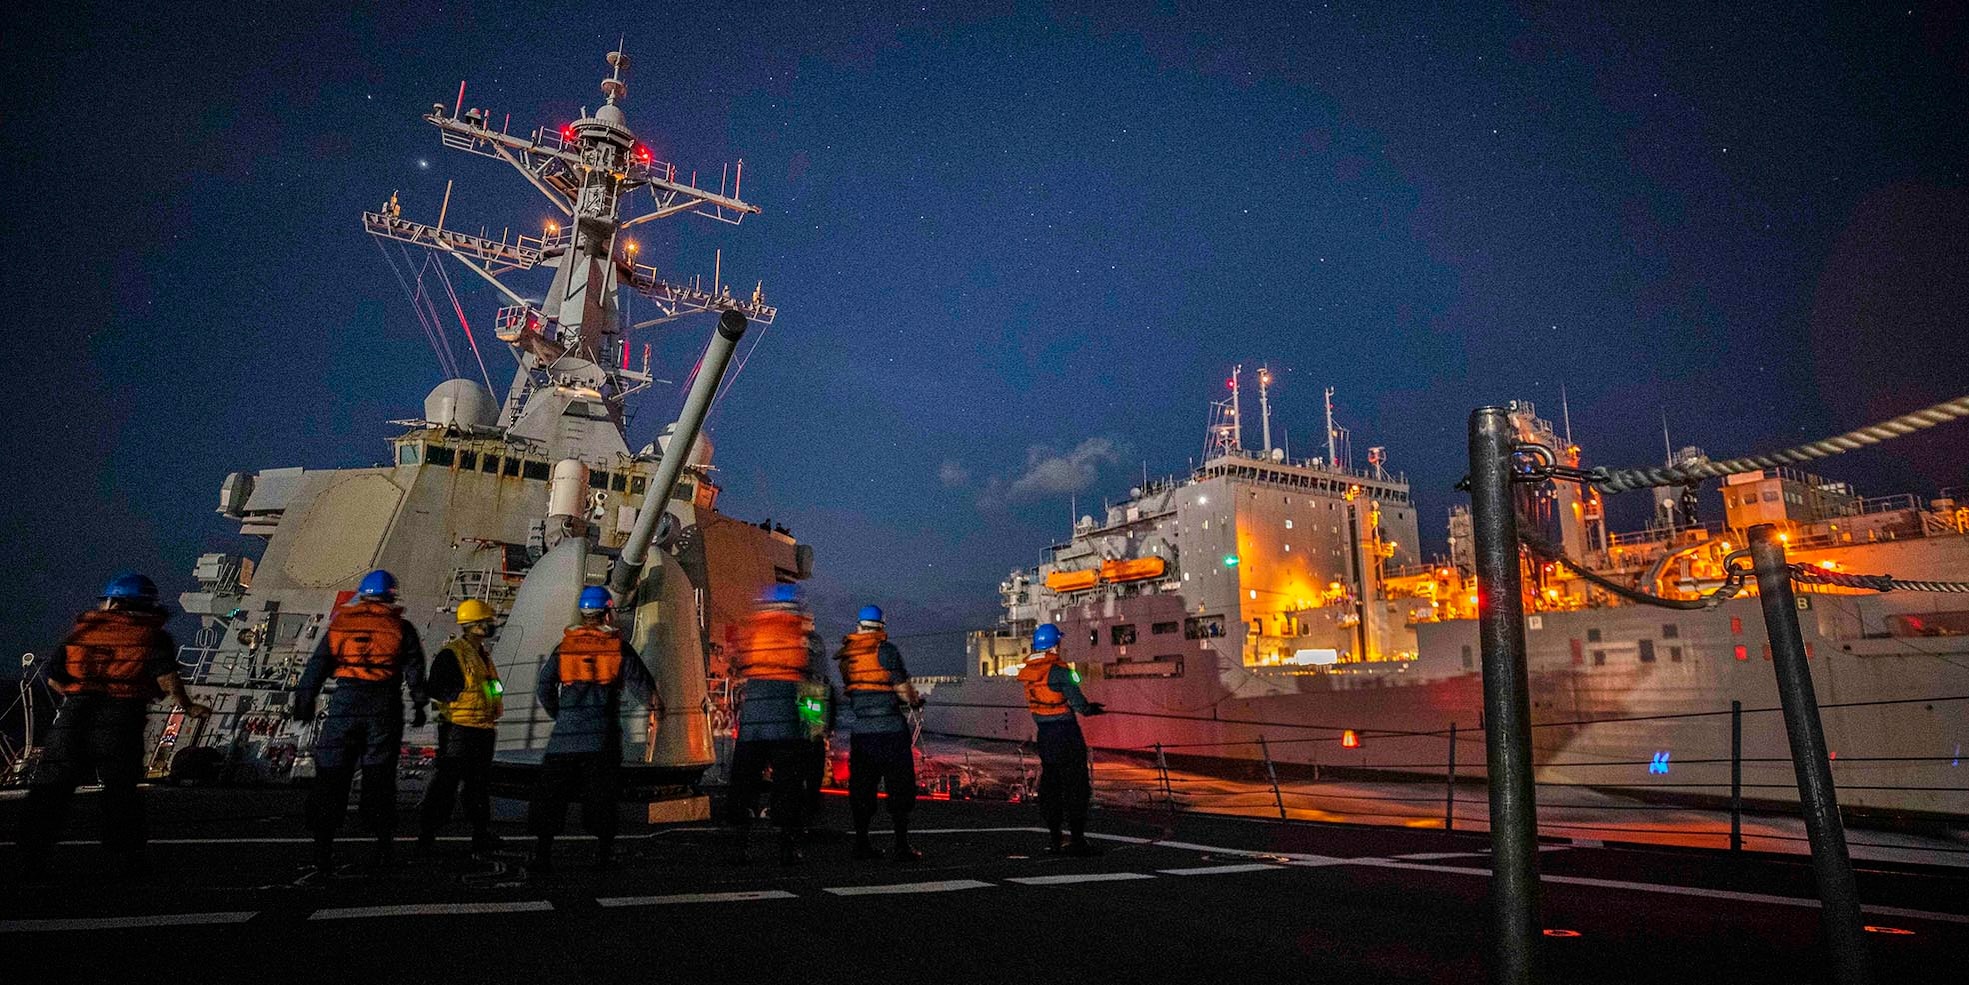 The Arleigh Burke-class guided-missile destroyer USS John S. McCain (DDG 56) conducts a replenishment-at-sea with the Lewis and Clark-class dry cargo and ammunition ship USNS Charles Drew (T-AKE 10).